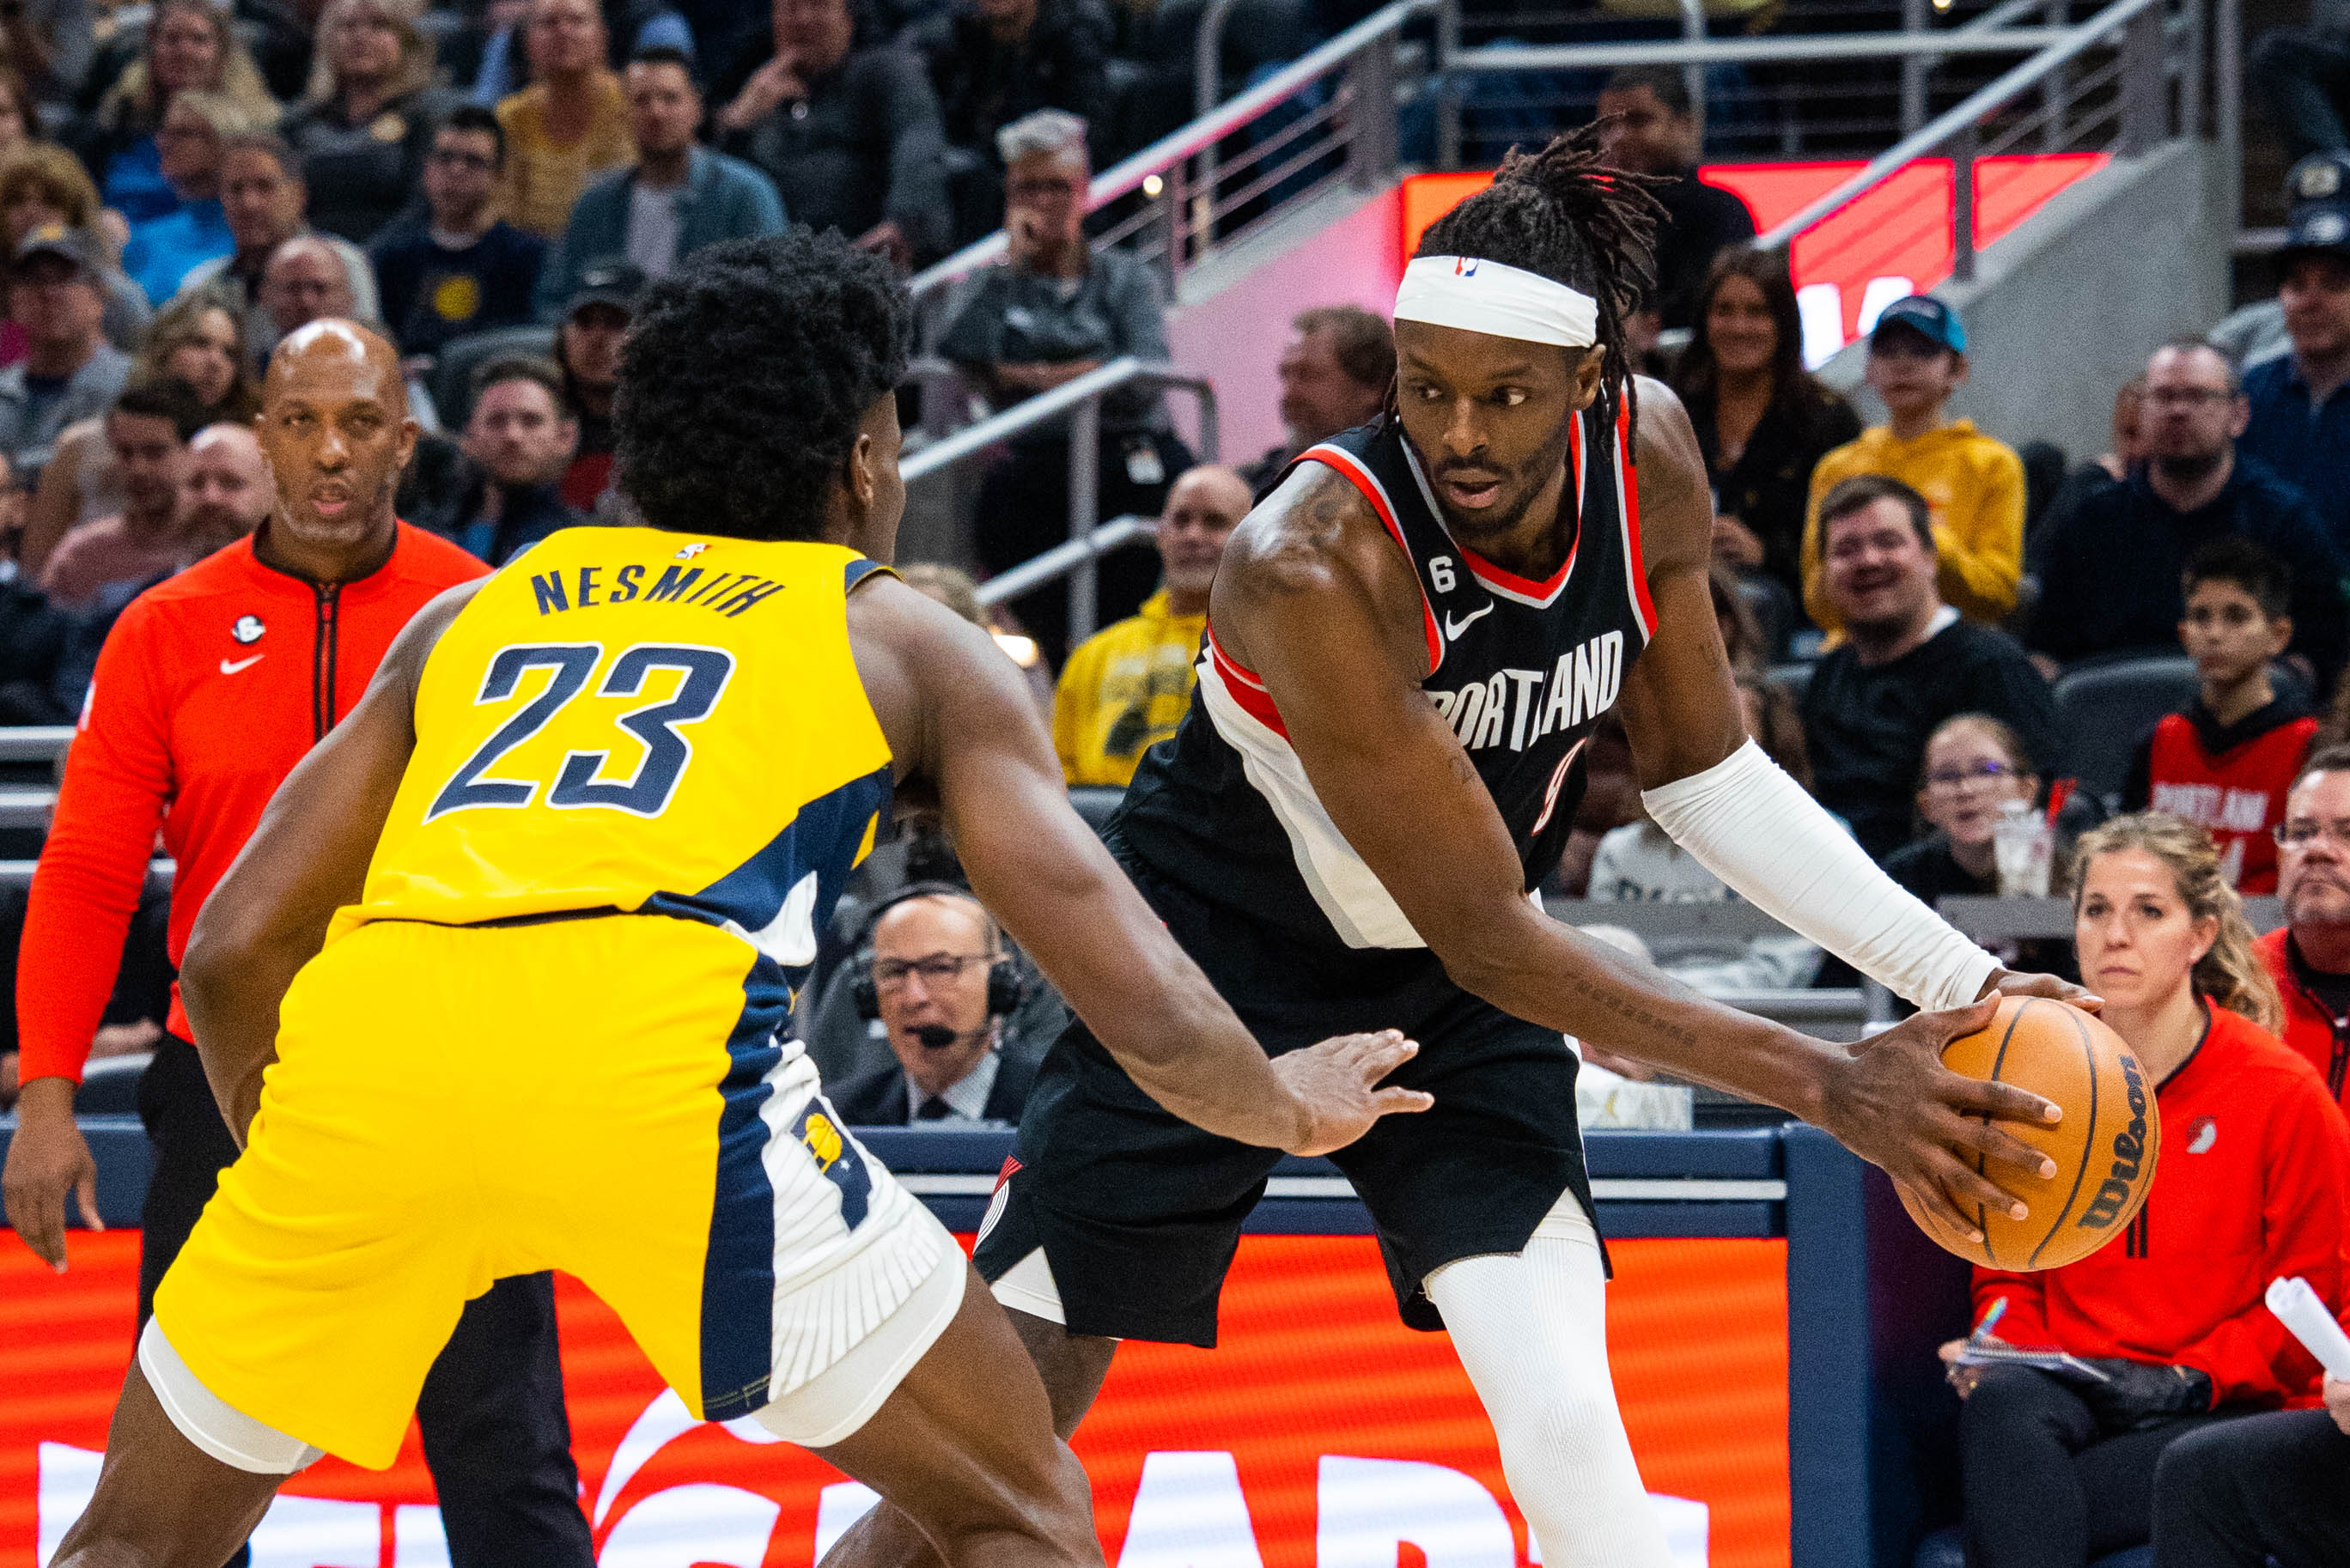 NBA: Portland Trail Blazers at Indiana Pacers